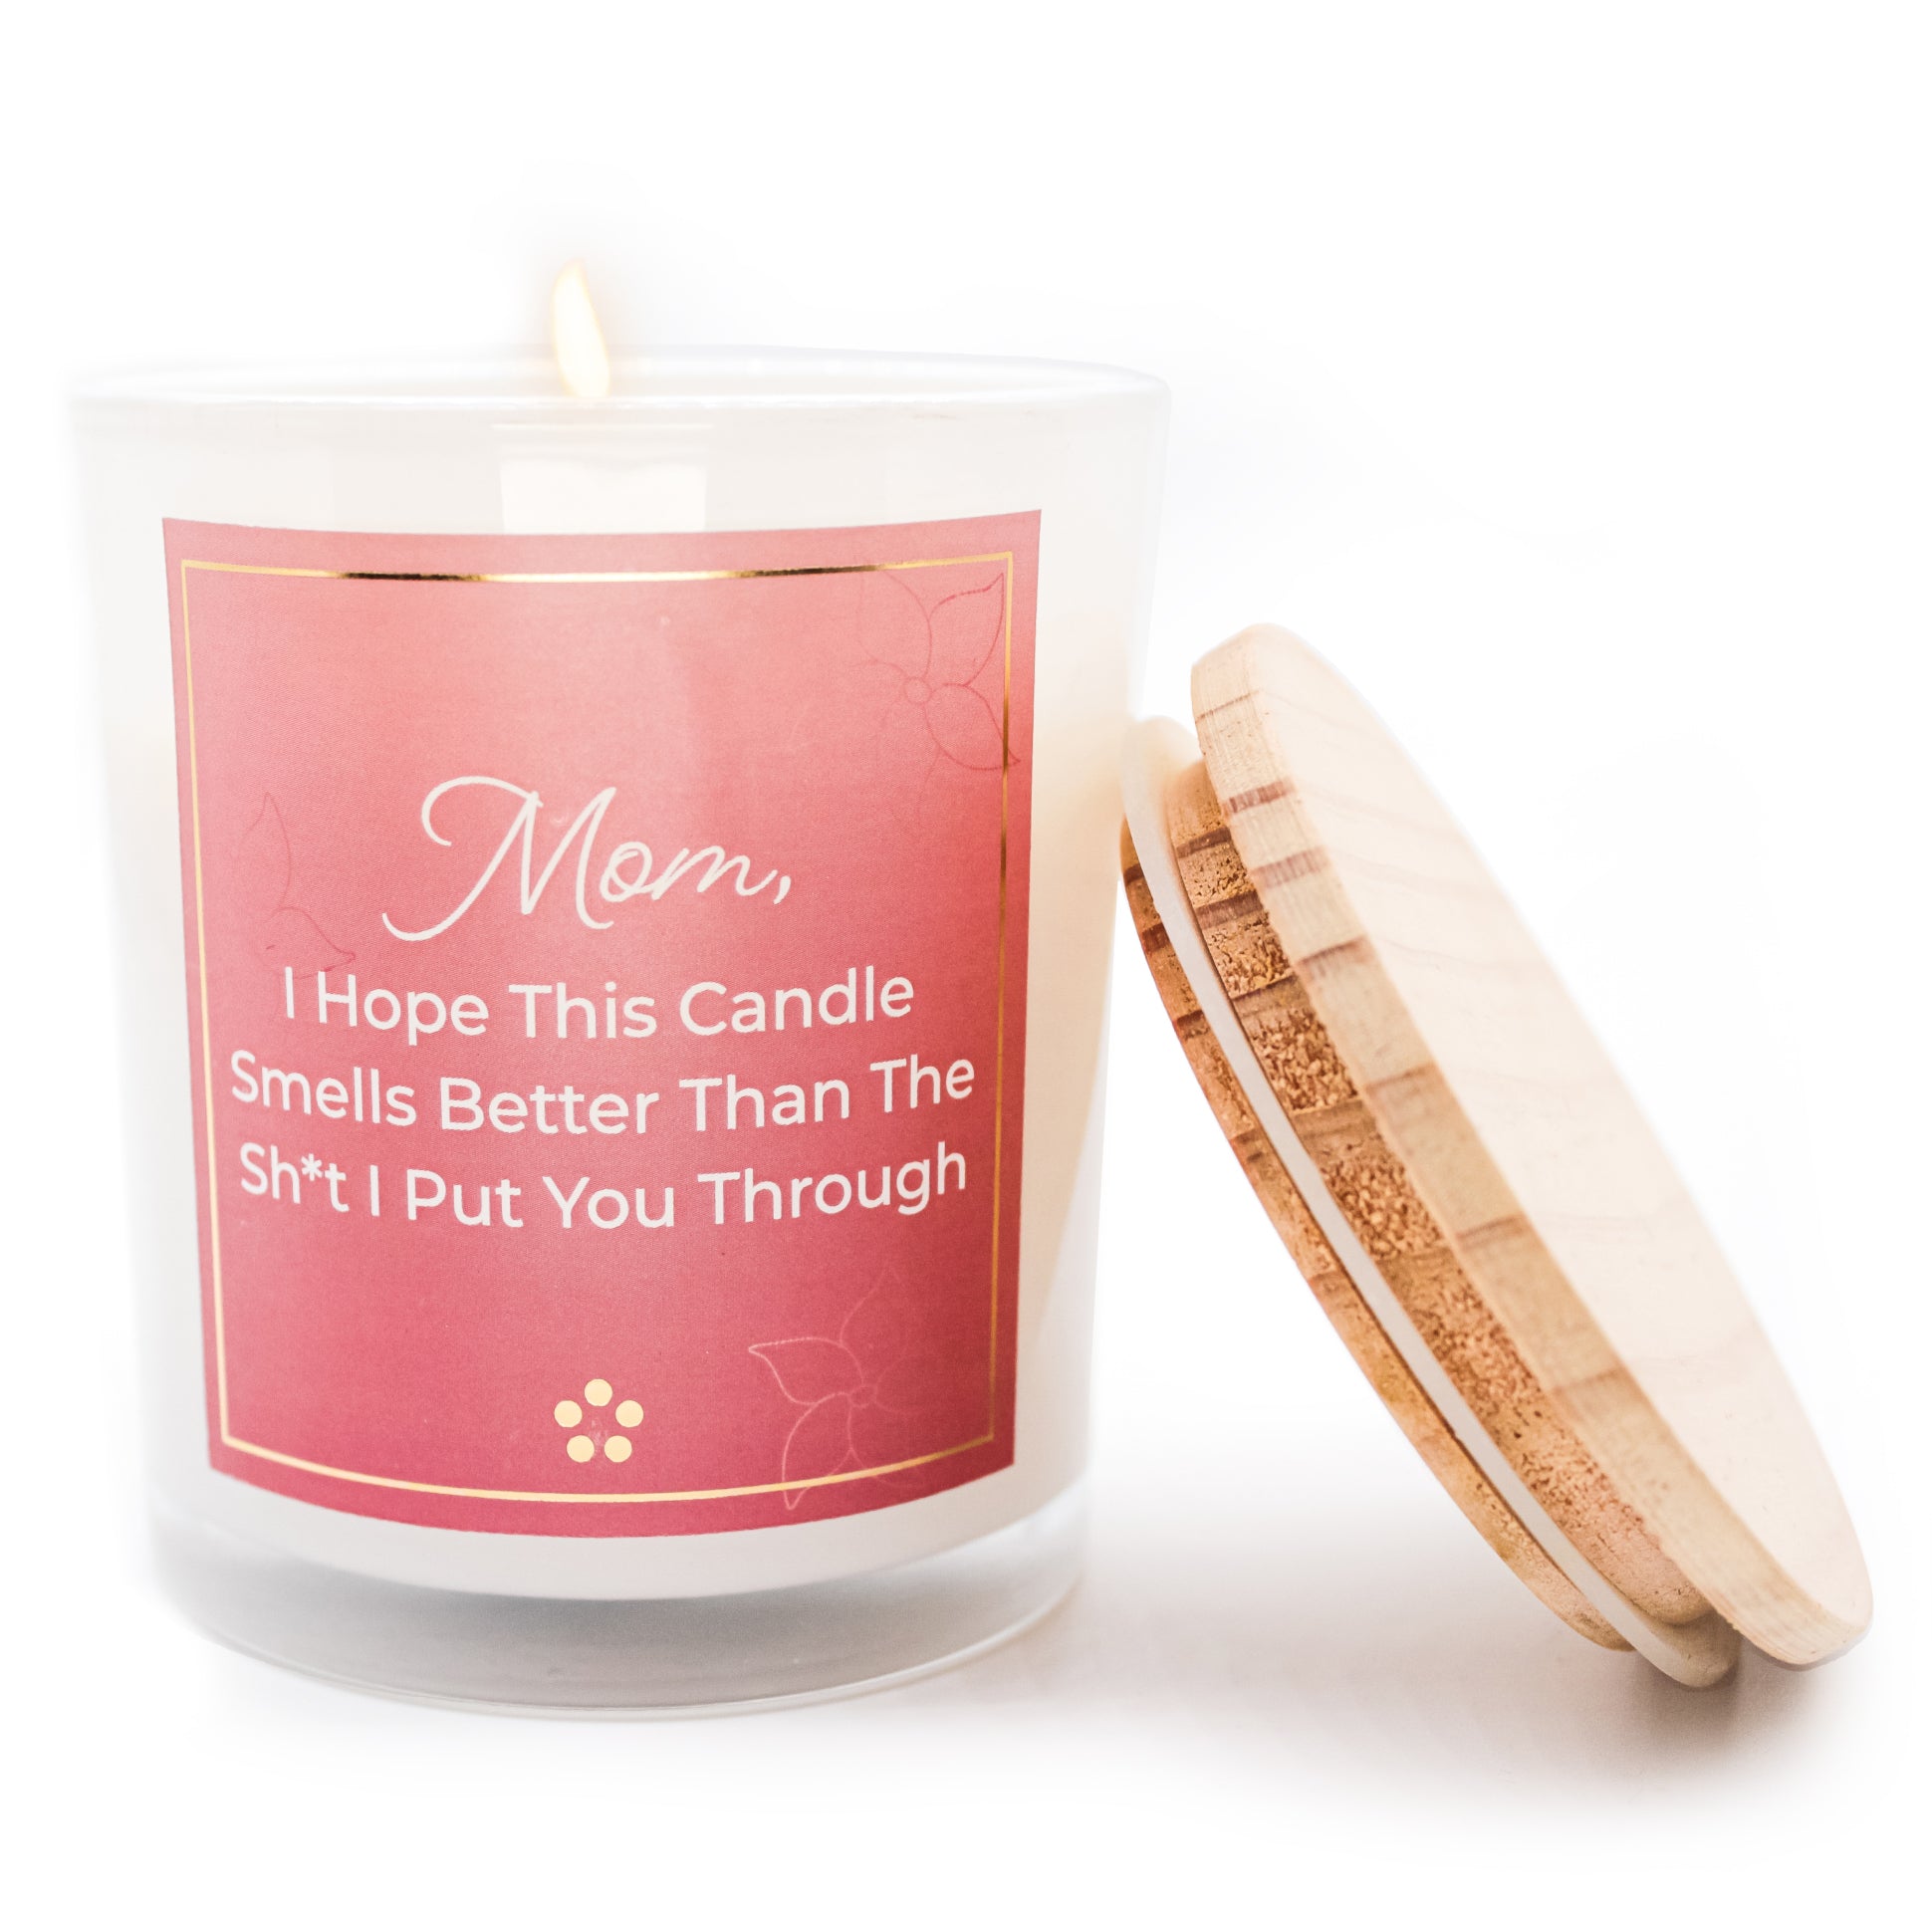 Funny Candle for Mom